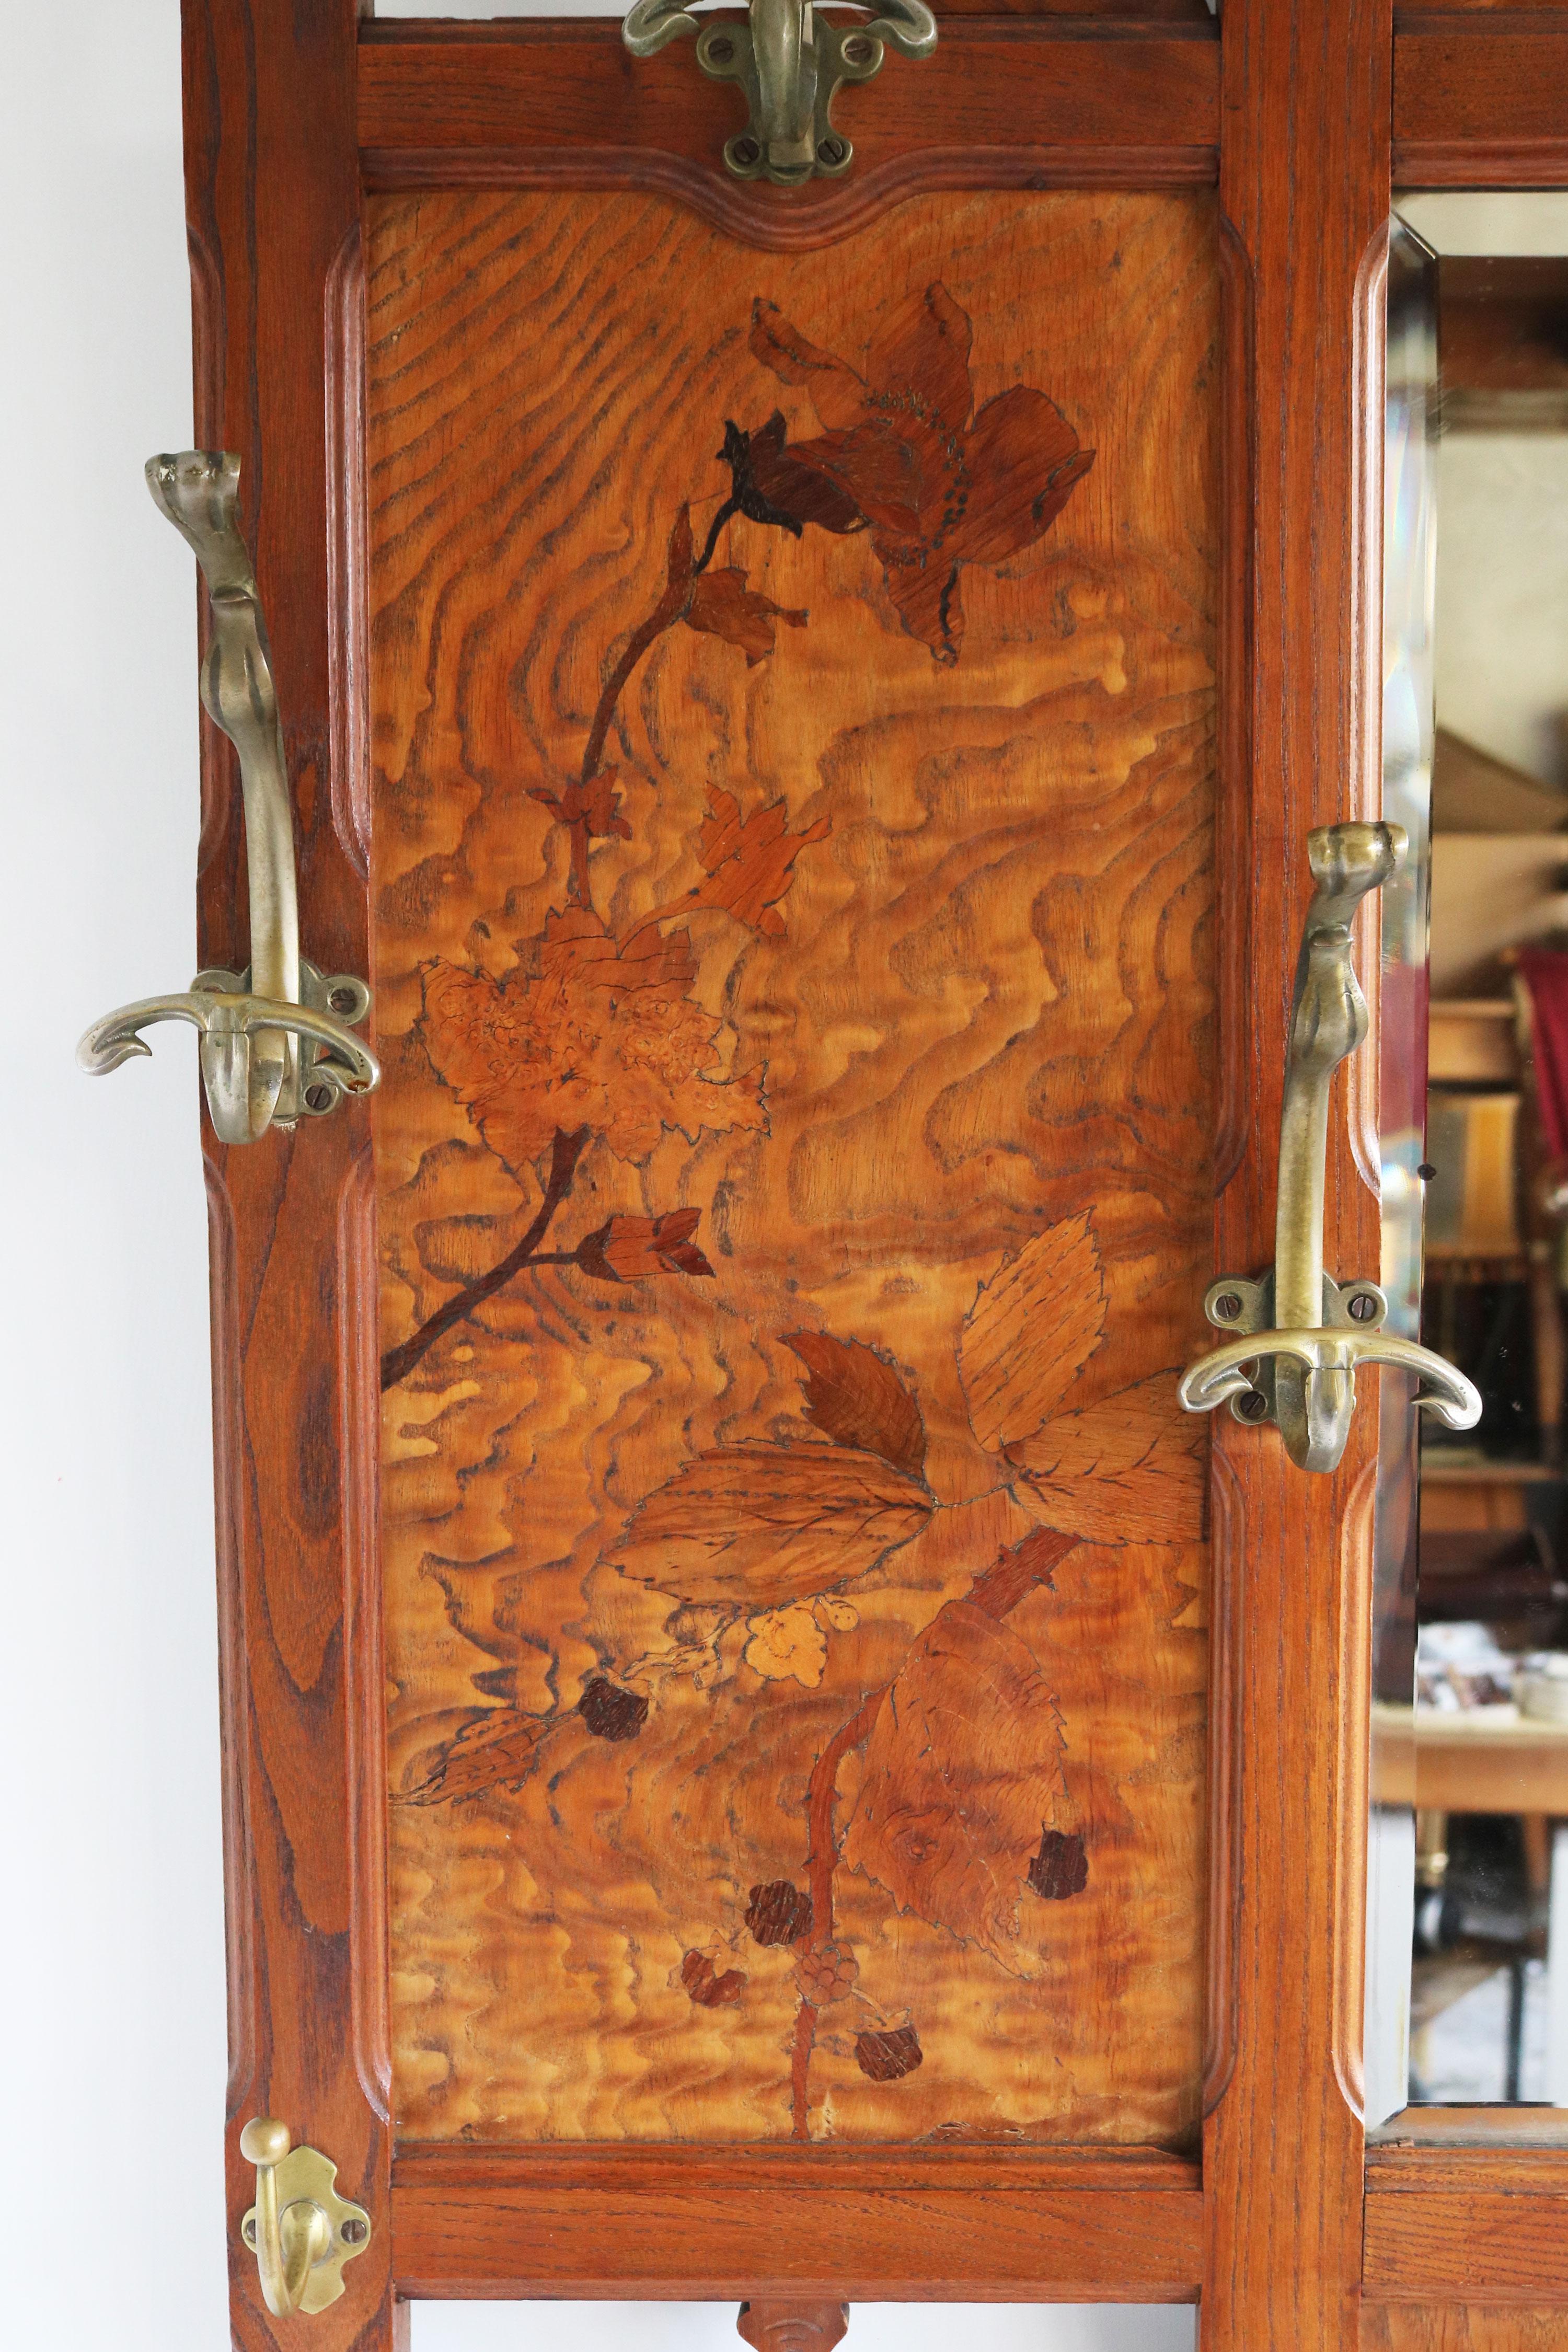 French Art nouveau hall tree / coat rack by Emile galle 1905 marquetry hallway For Sale 7